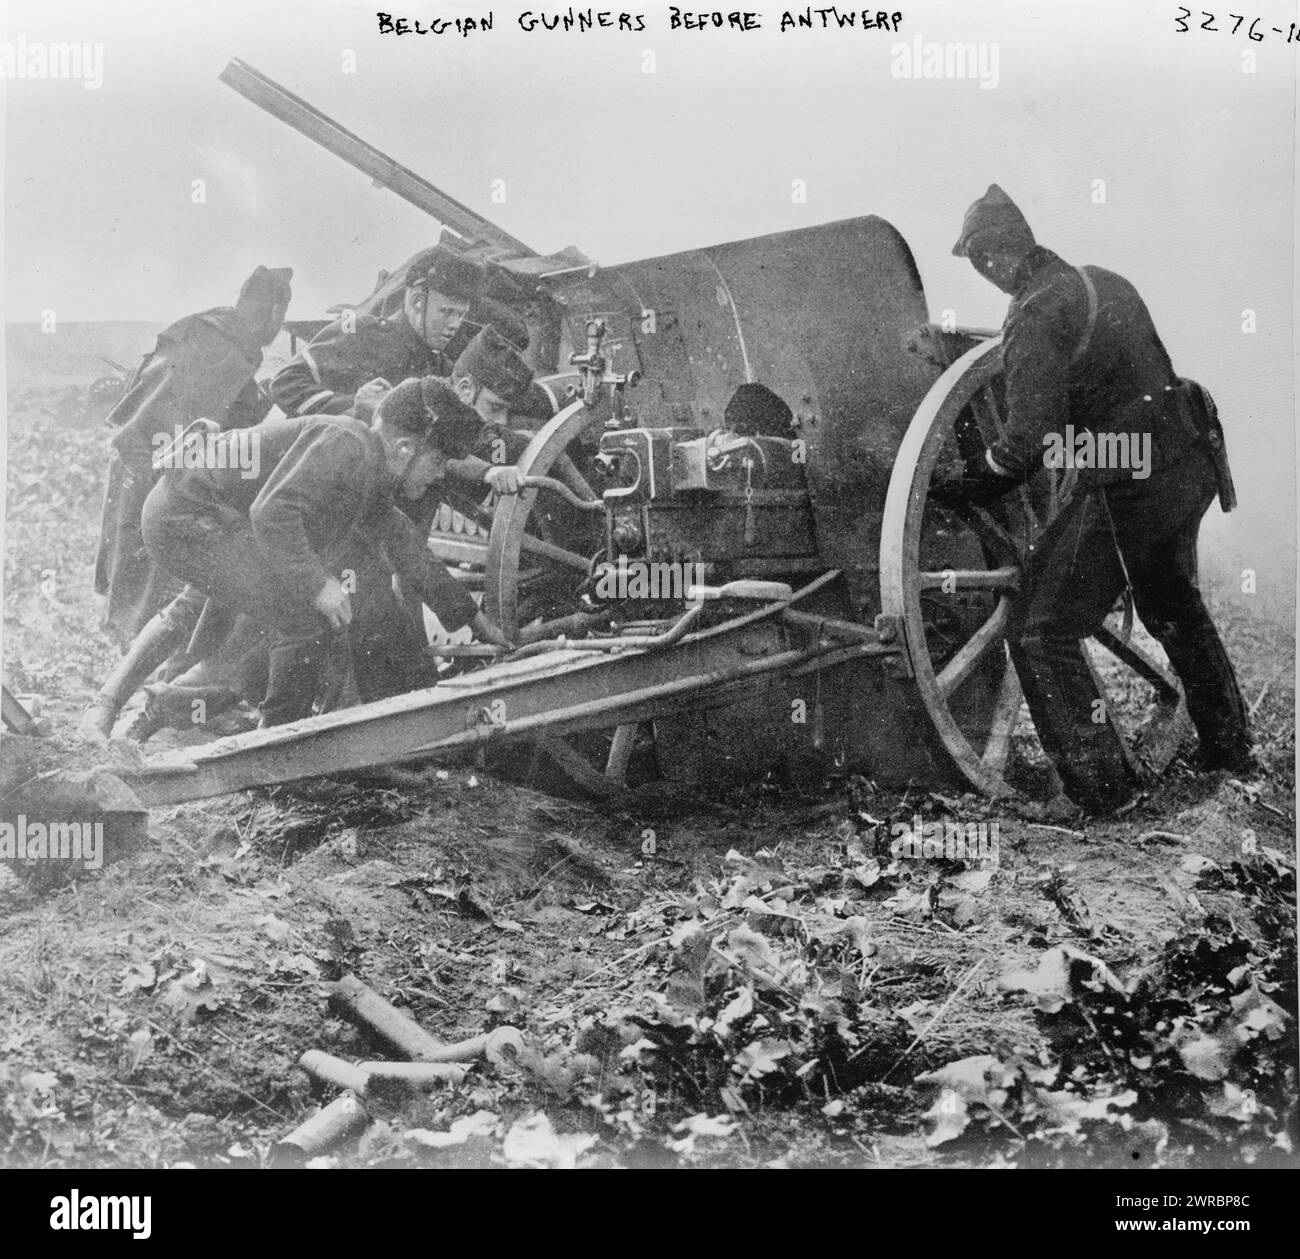 Belgian Gunners before Antwerp, Photograph shows Belgian soldiers with large field gun, during the Siege of Antwerp by the German Army during World War I., 1914, World War, 1914-1918, Glass negatives, 1 negative: glass Stock Photo